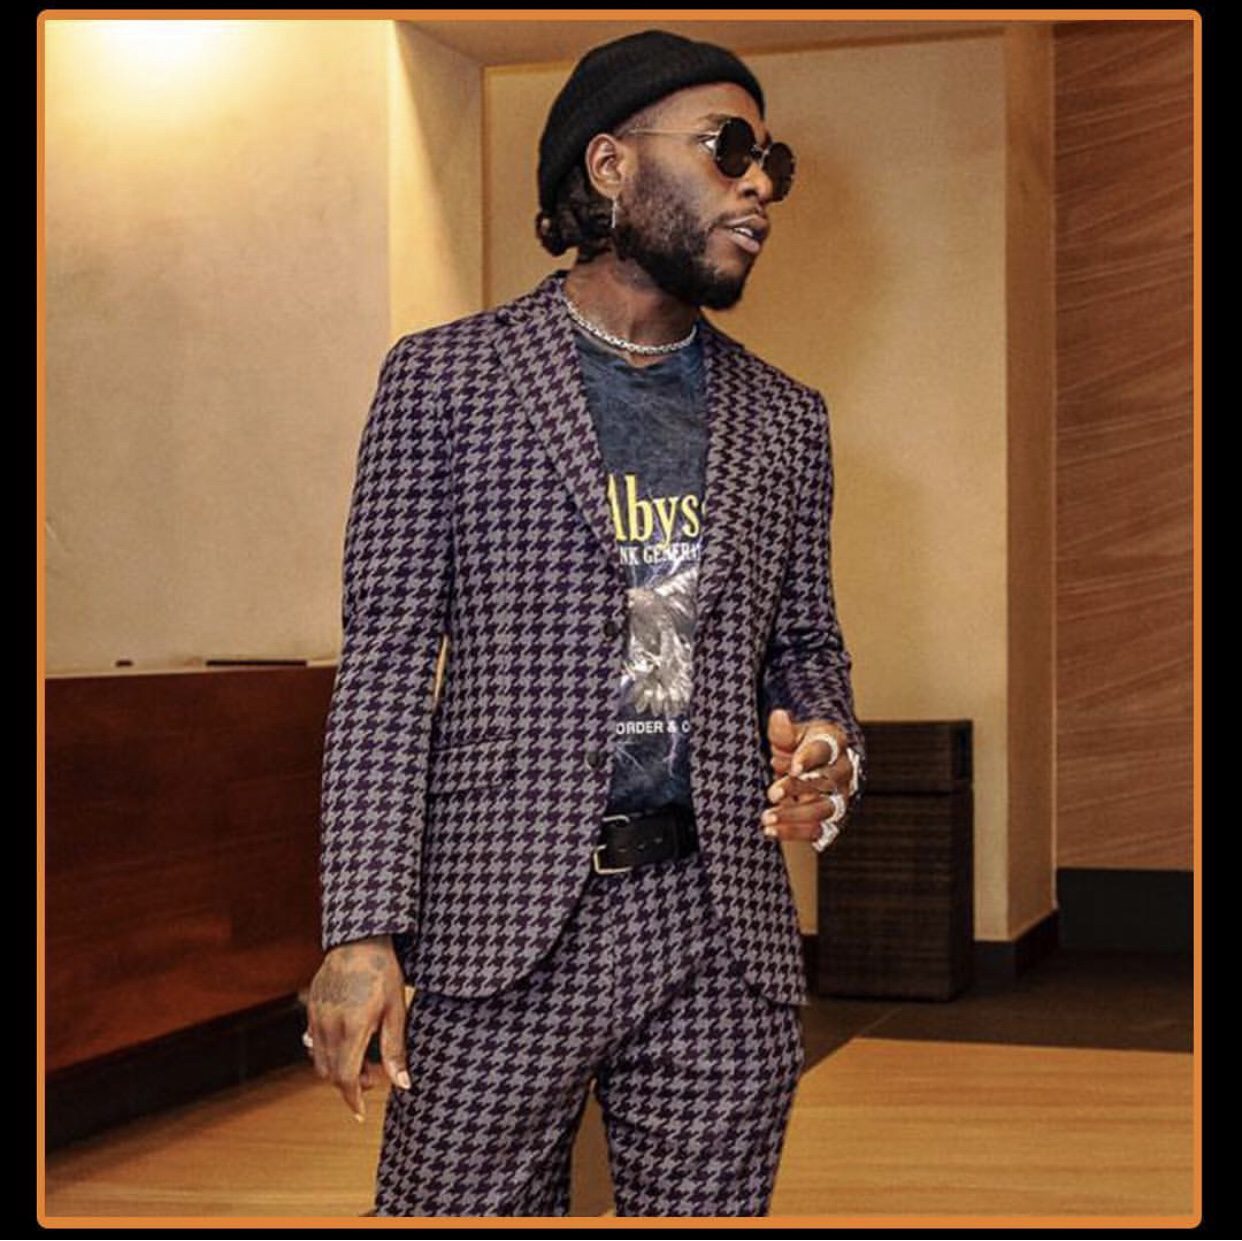 Burna Boy recounts his rise to fame in new YouTube documentary